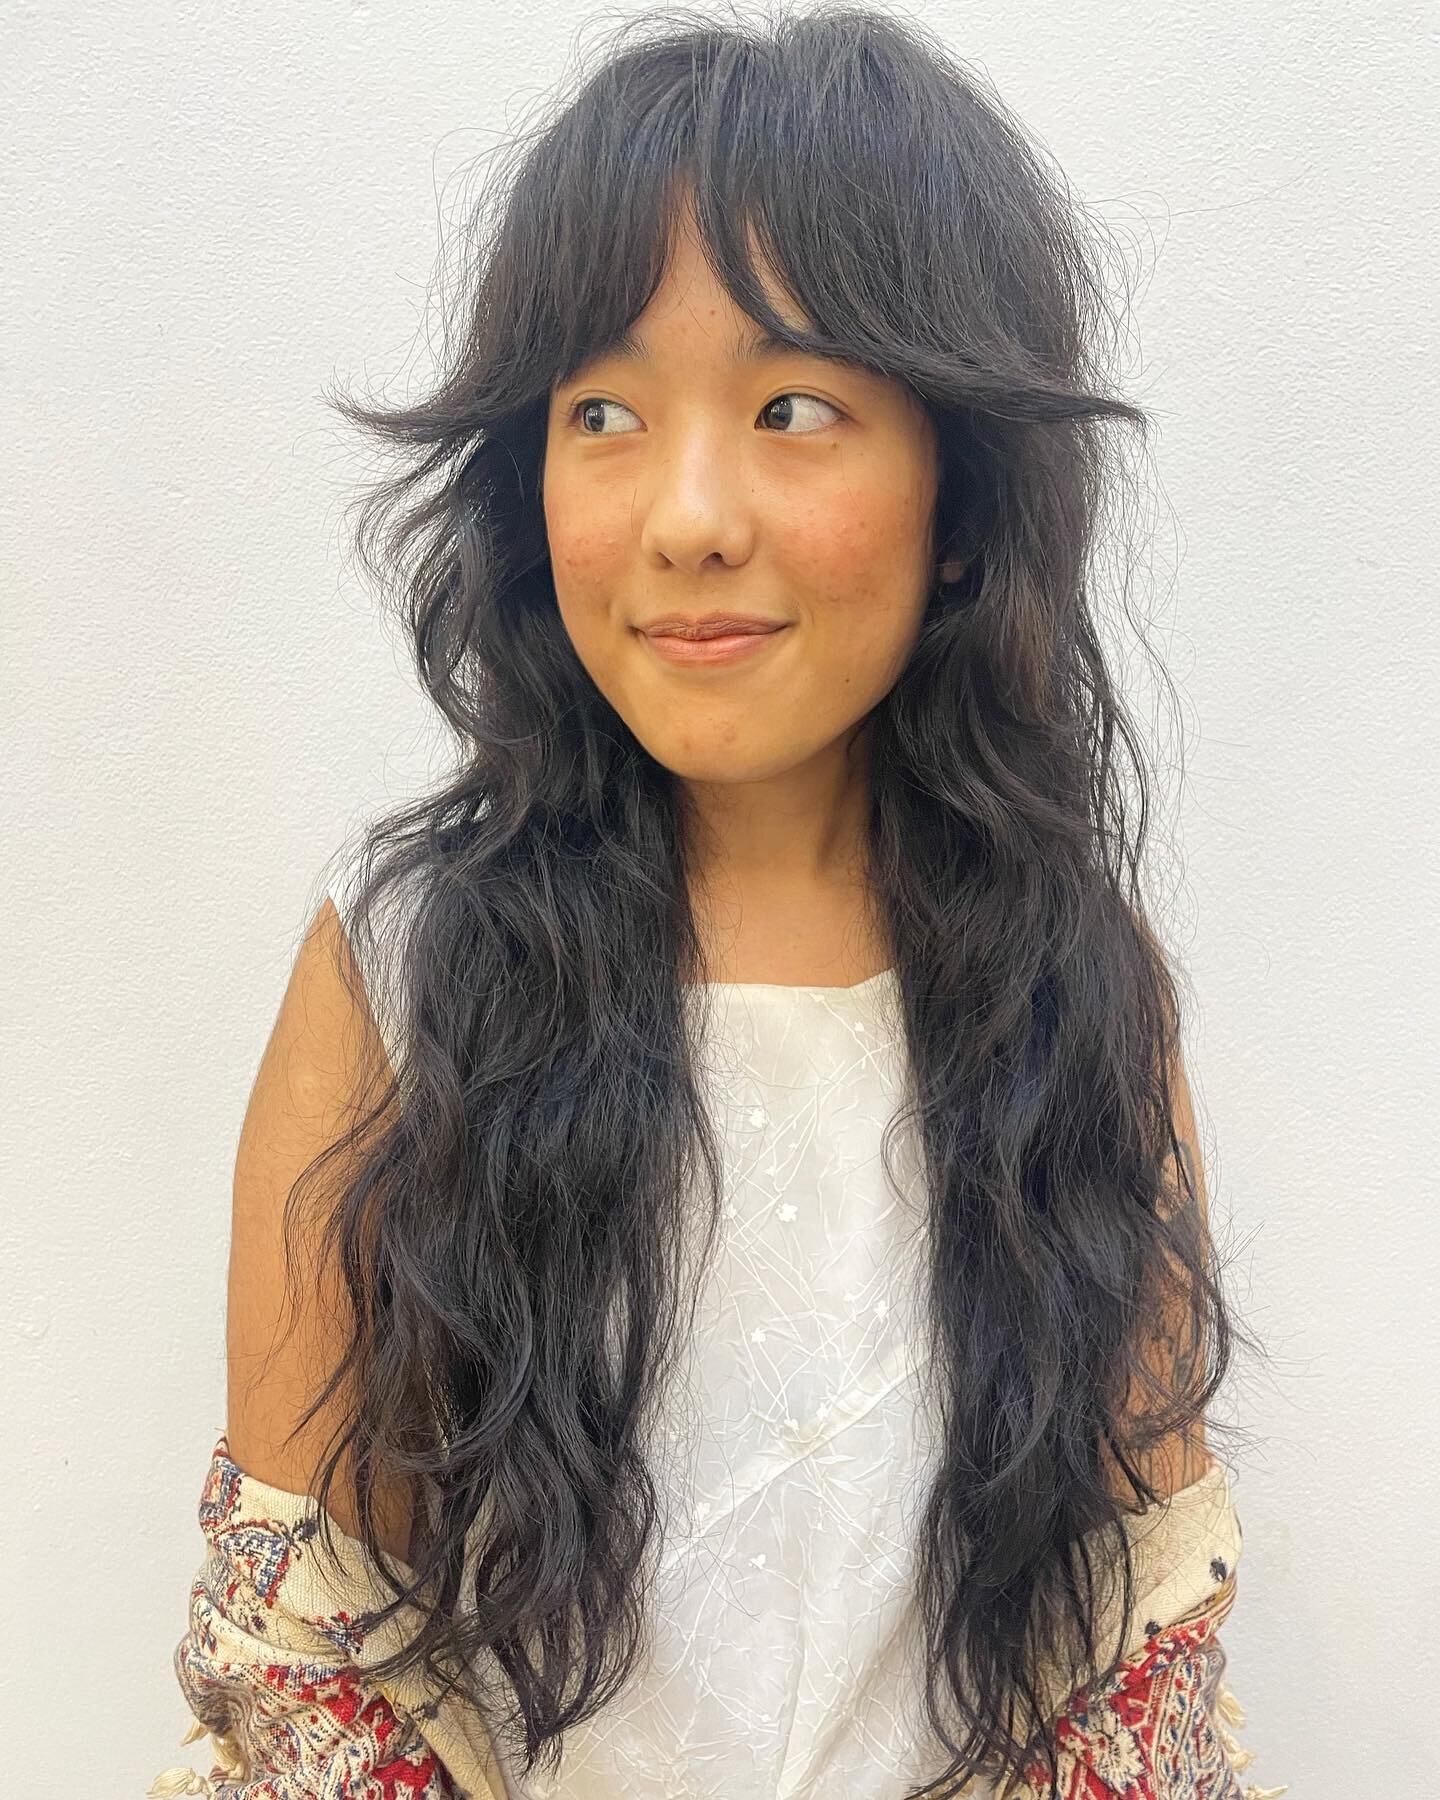 I have not cut hair this thick/long in a while !! How dreamy does the end result look ✨✨✨
@a_h_salon 
.
.
.
.
.
.
.
.
.
.
.
.
.
.
.
.
.
.
.
.
.
.
.
#shag #drycut #curlyshag #longhair #curls #curlyhair #curtainbangs #fringe #bangs